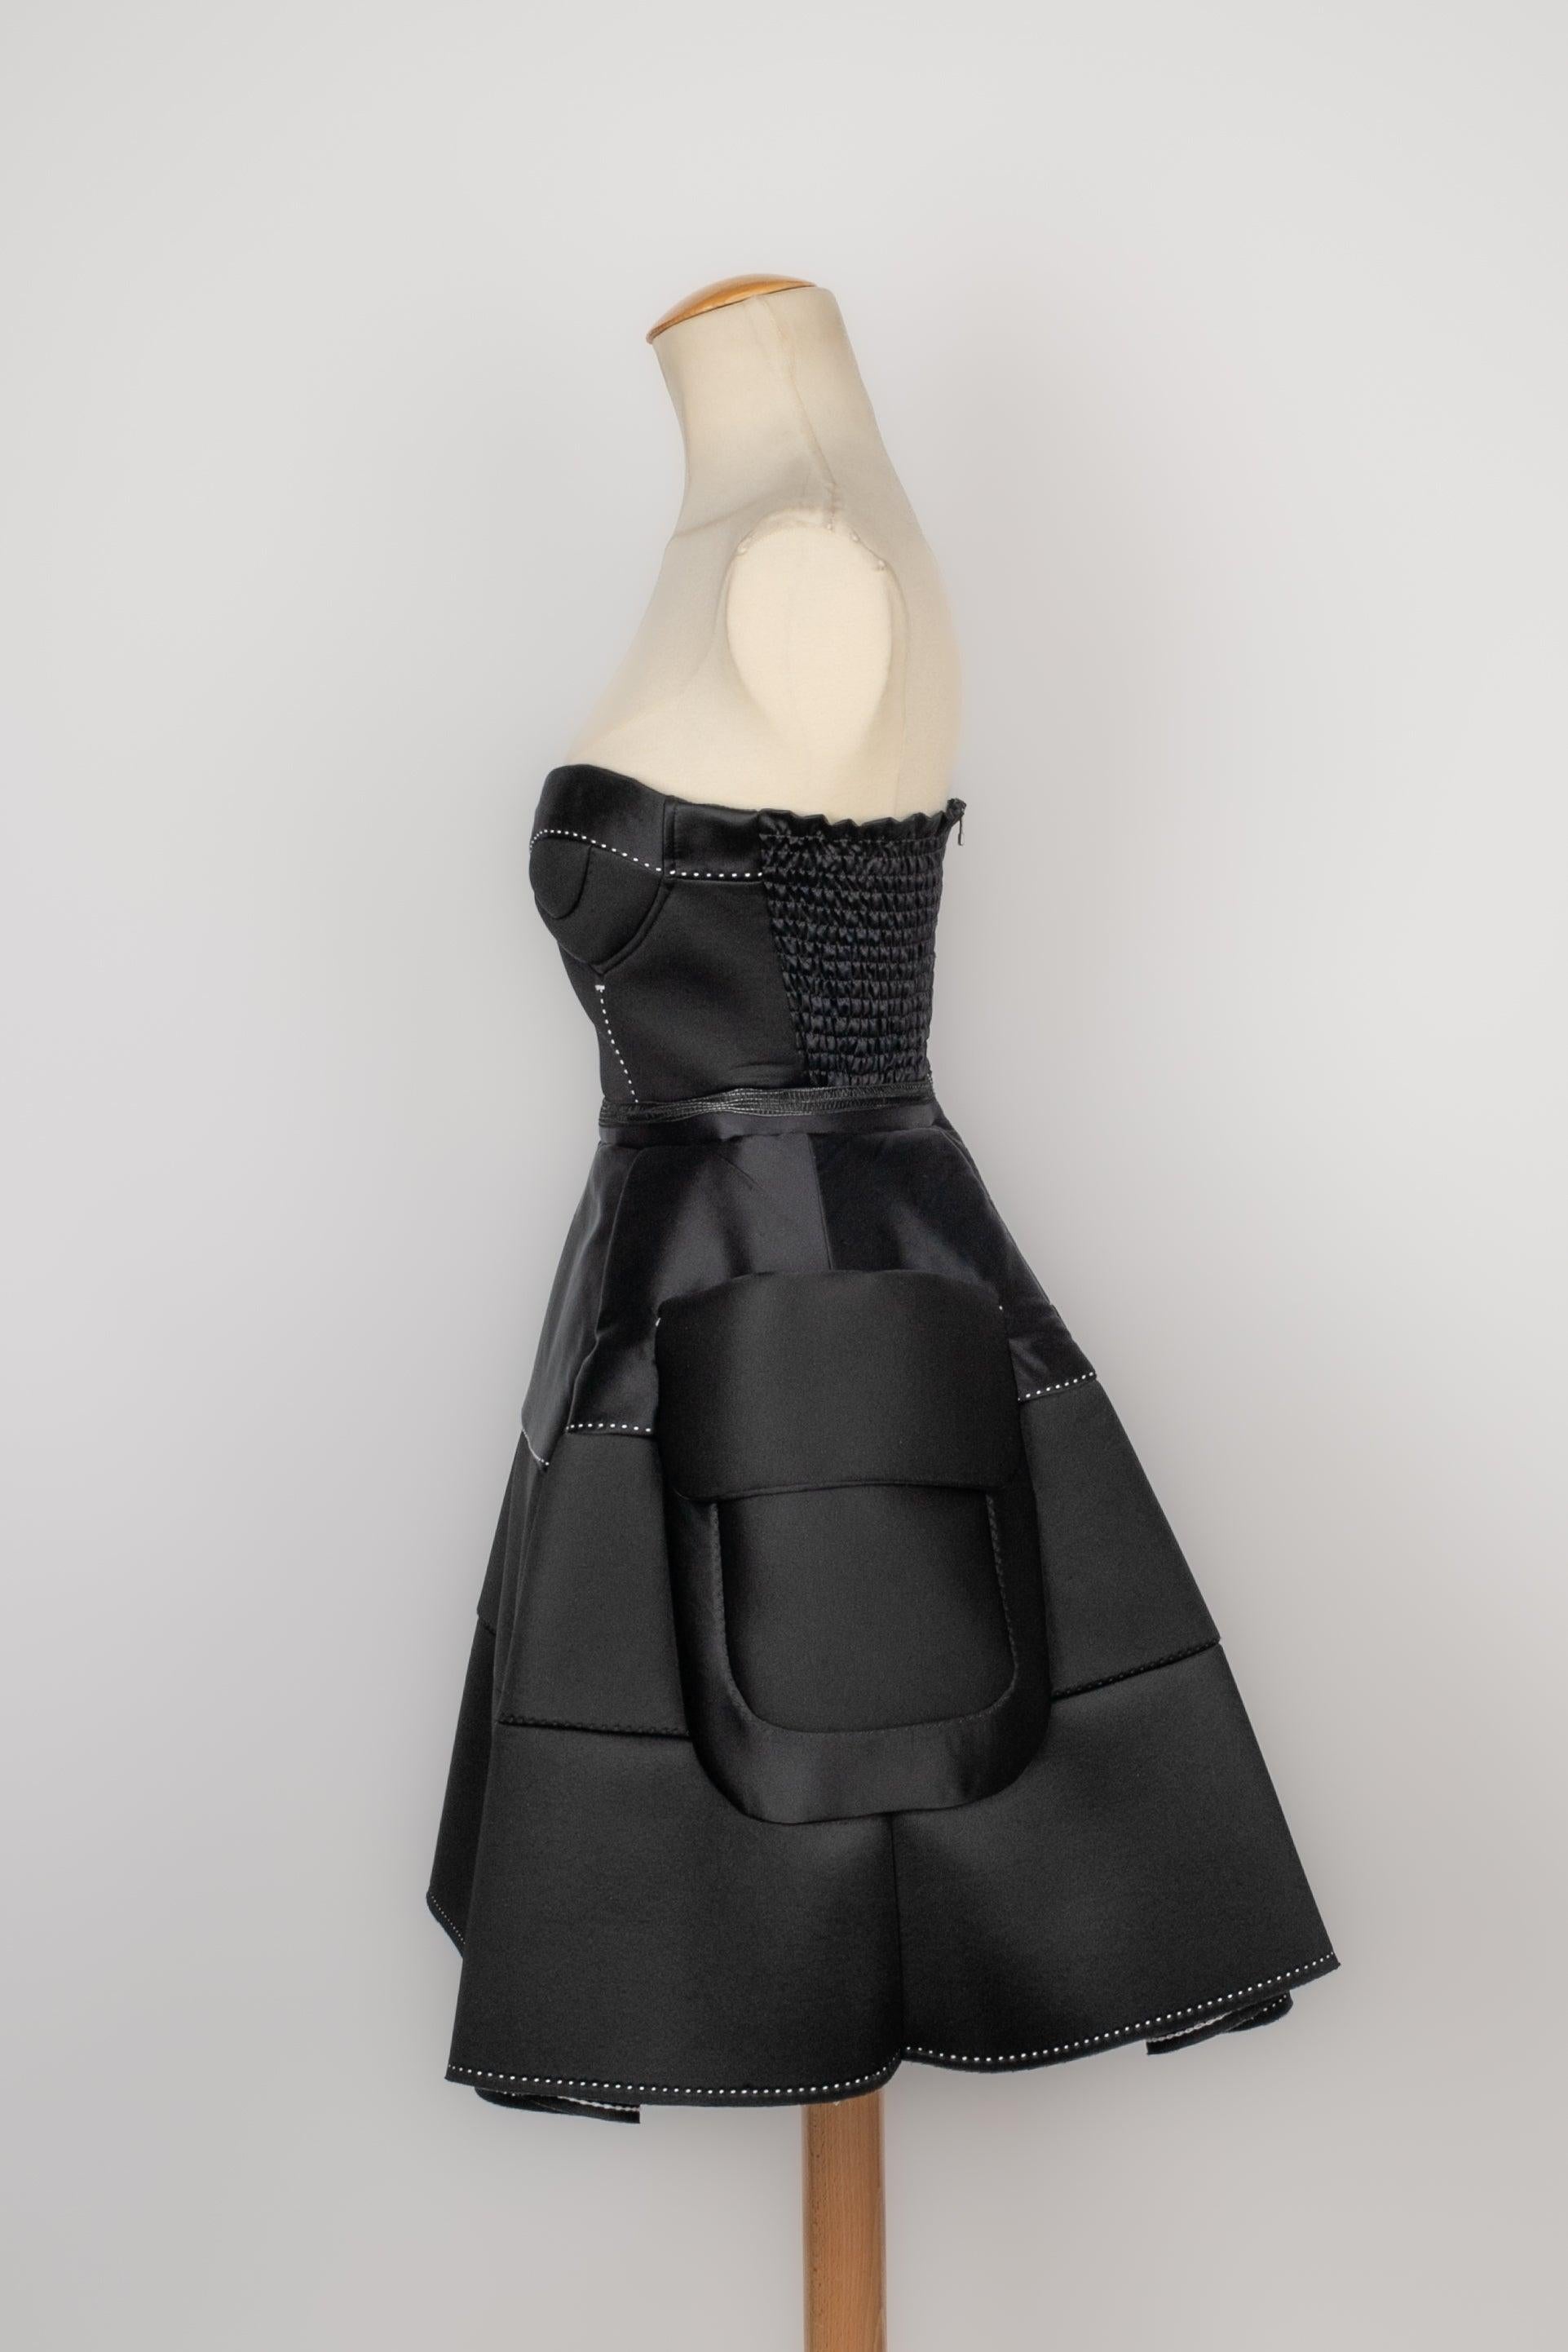 Paule Ka - Black neoprene mini bustier dress. Size 36FR.

Additional information:
Condition: Very good condition
Dimensions: Chest: 39 cm - Waist: 30 - Length: 67 cm

Seller Reference: VR393